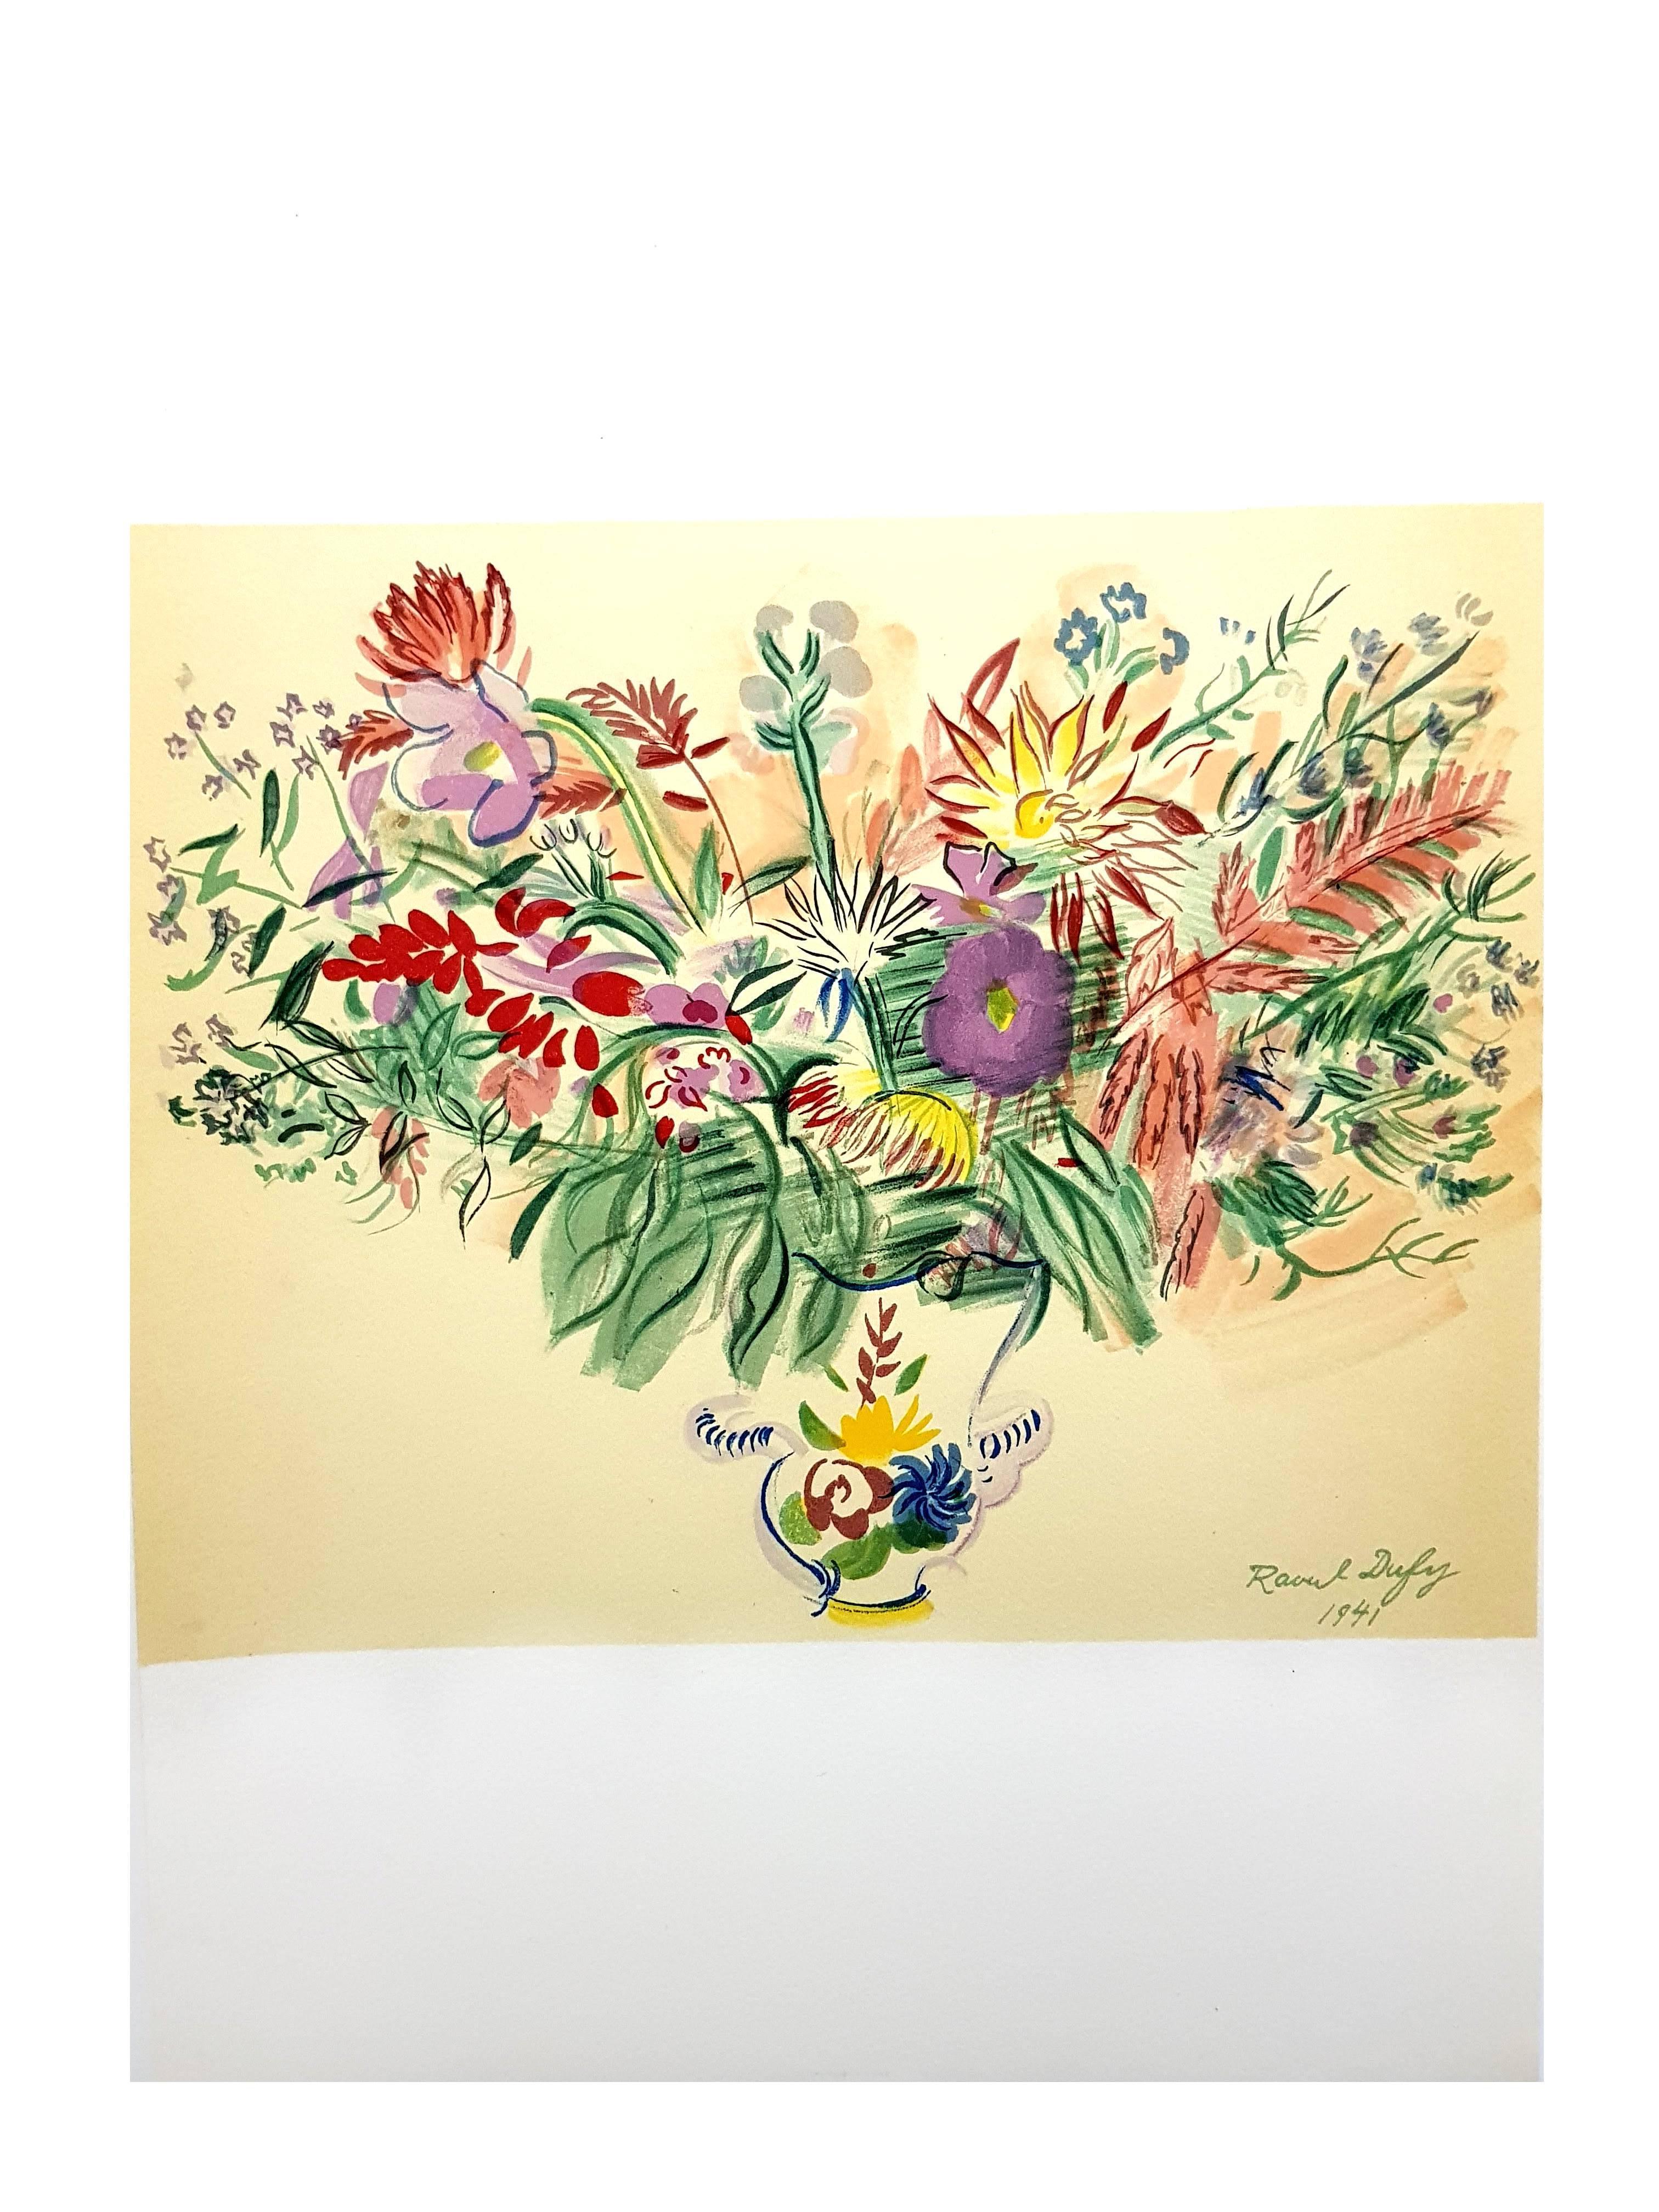 Flowers - Lithograph - Yellow Portrait Print by (after) Raoul Dufy